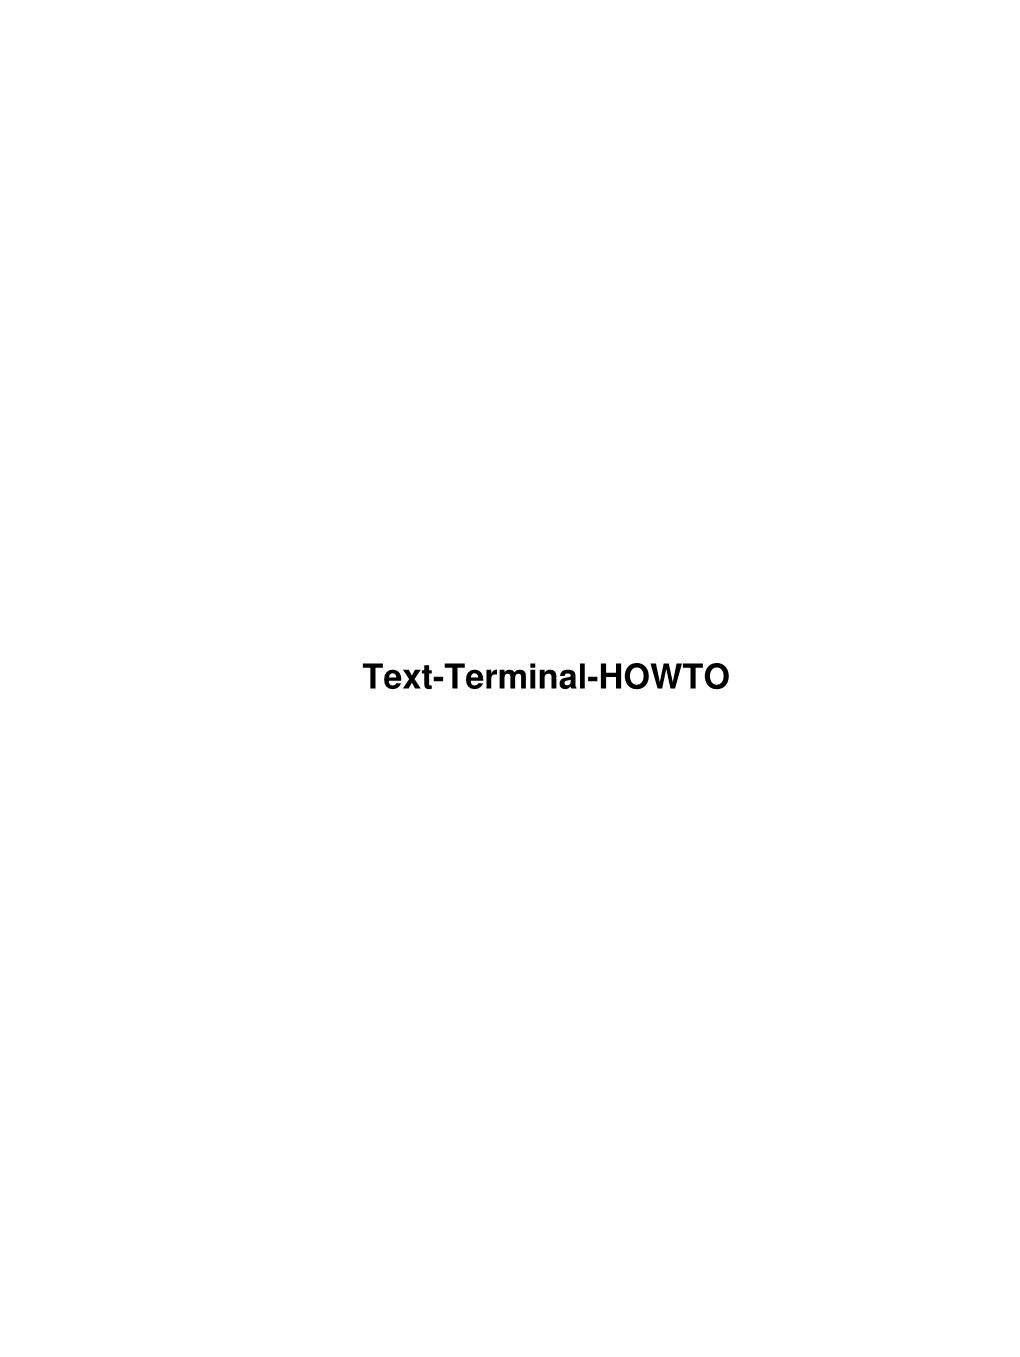 Text-Terminal-HOWTO Text-Terminal-HOWTO Table of Contents Text-Terminal-HOWTO